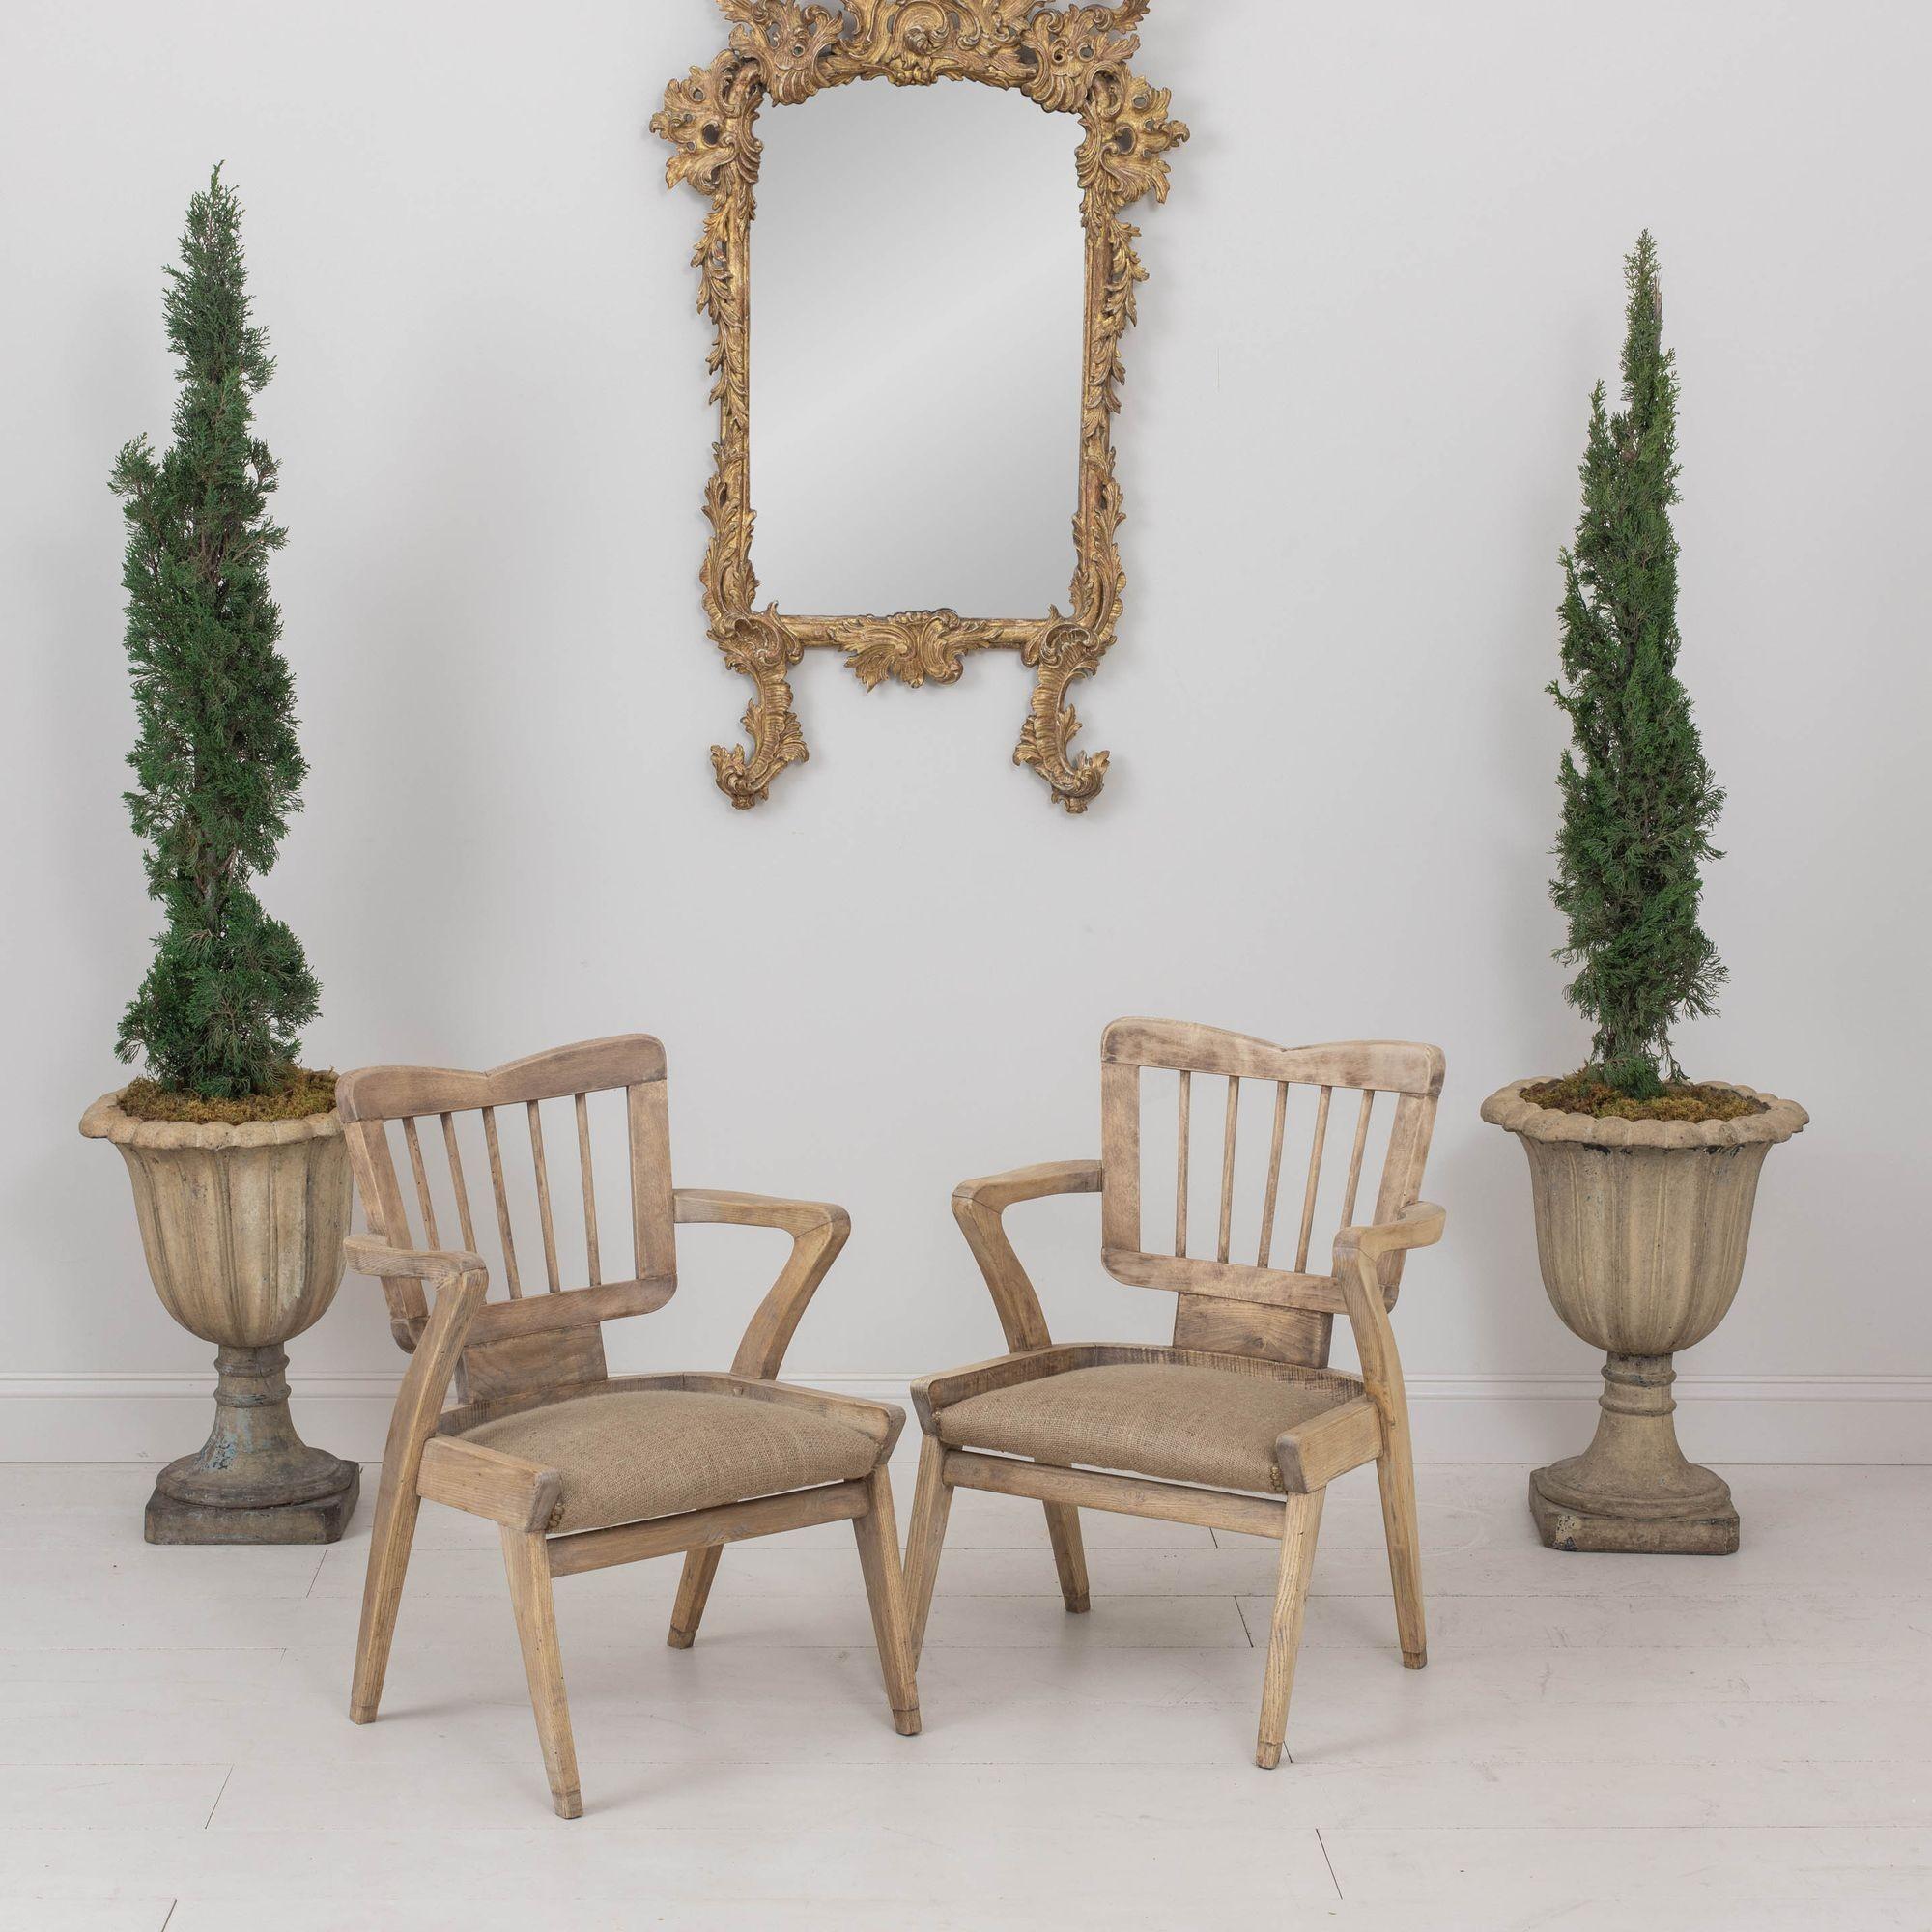 A unique pair of French armchairs in bleached beech wood from the mid 20th century. These stylish chairs have a natural, burlap seat with nail head trim.